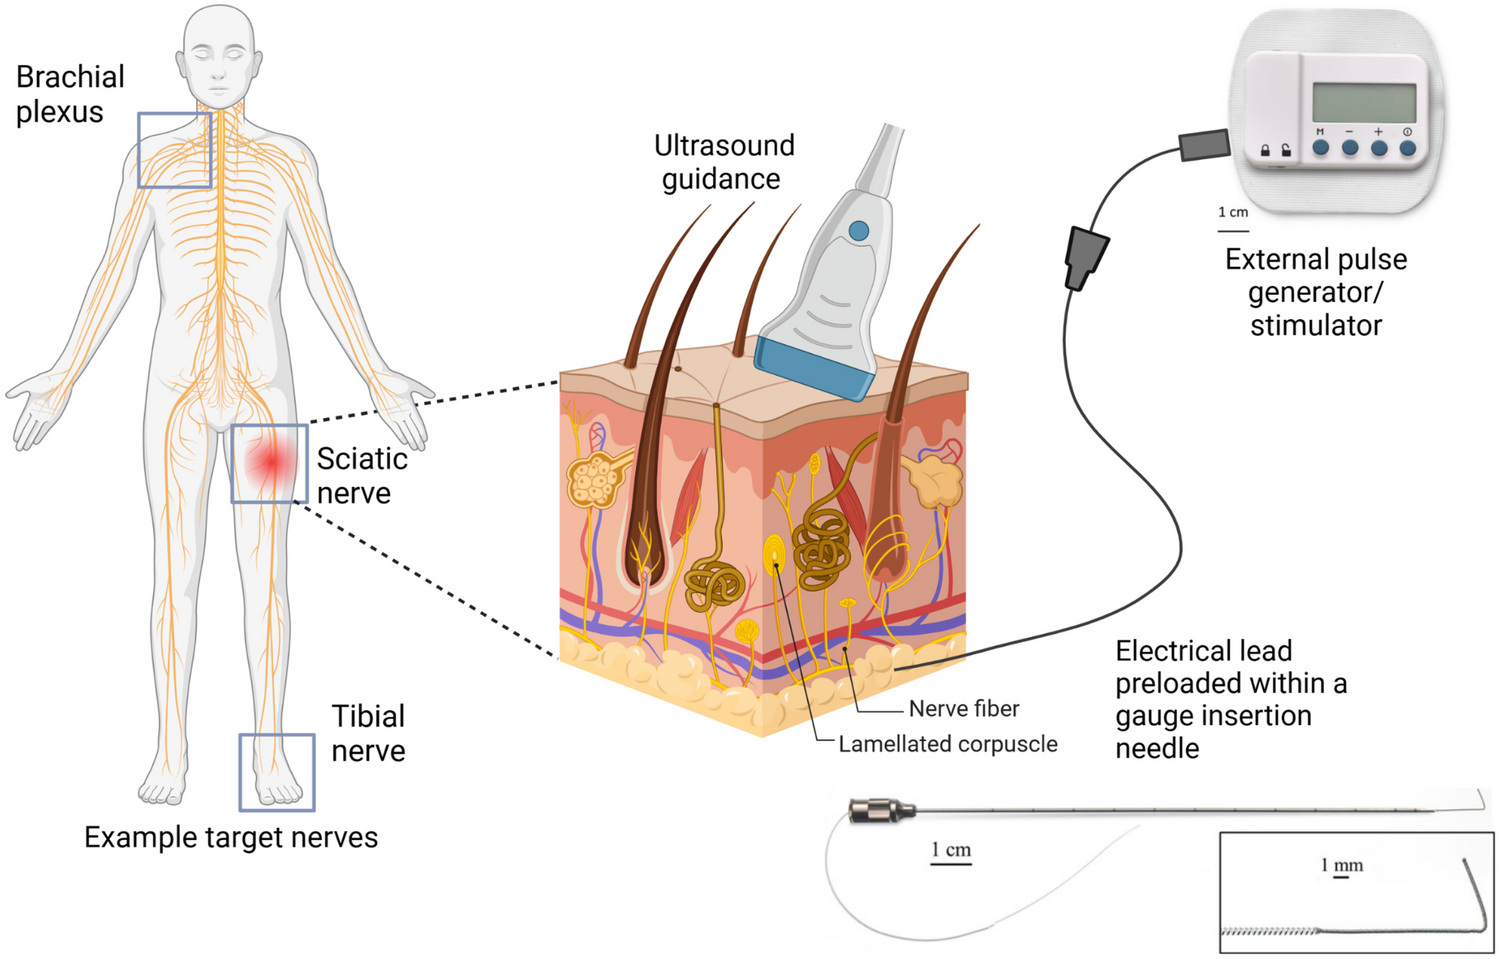 Peripheral Nerve Stimulation in Postoperative Analgesia: A Narrative Review